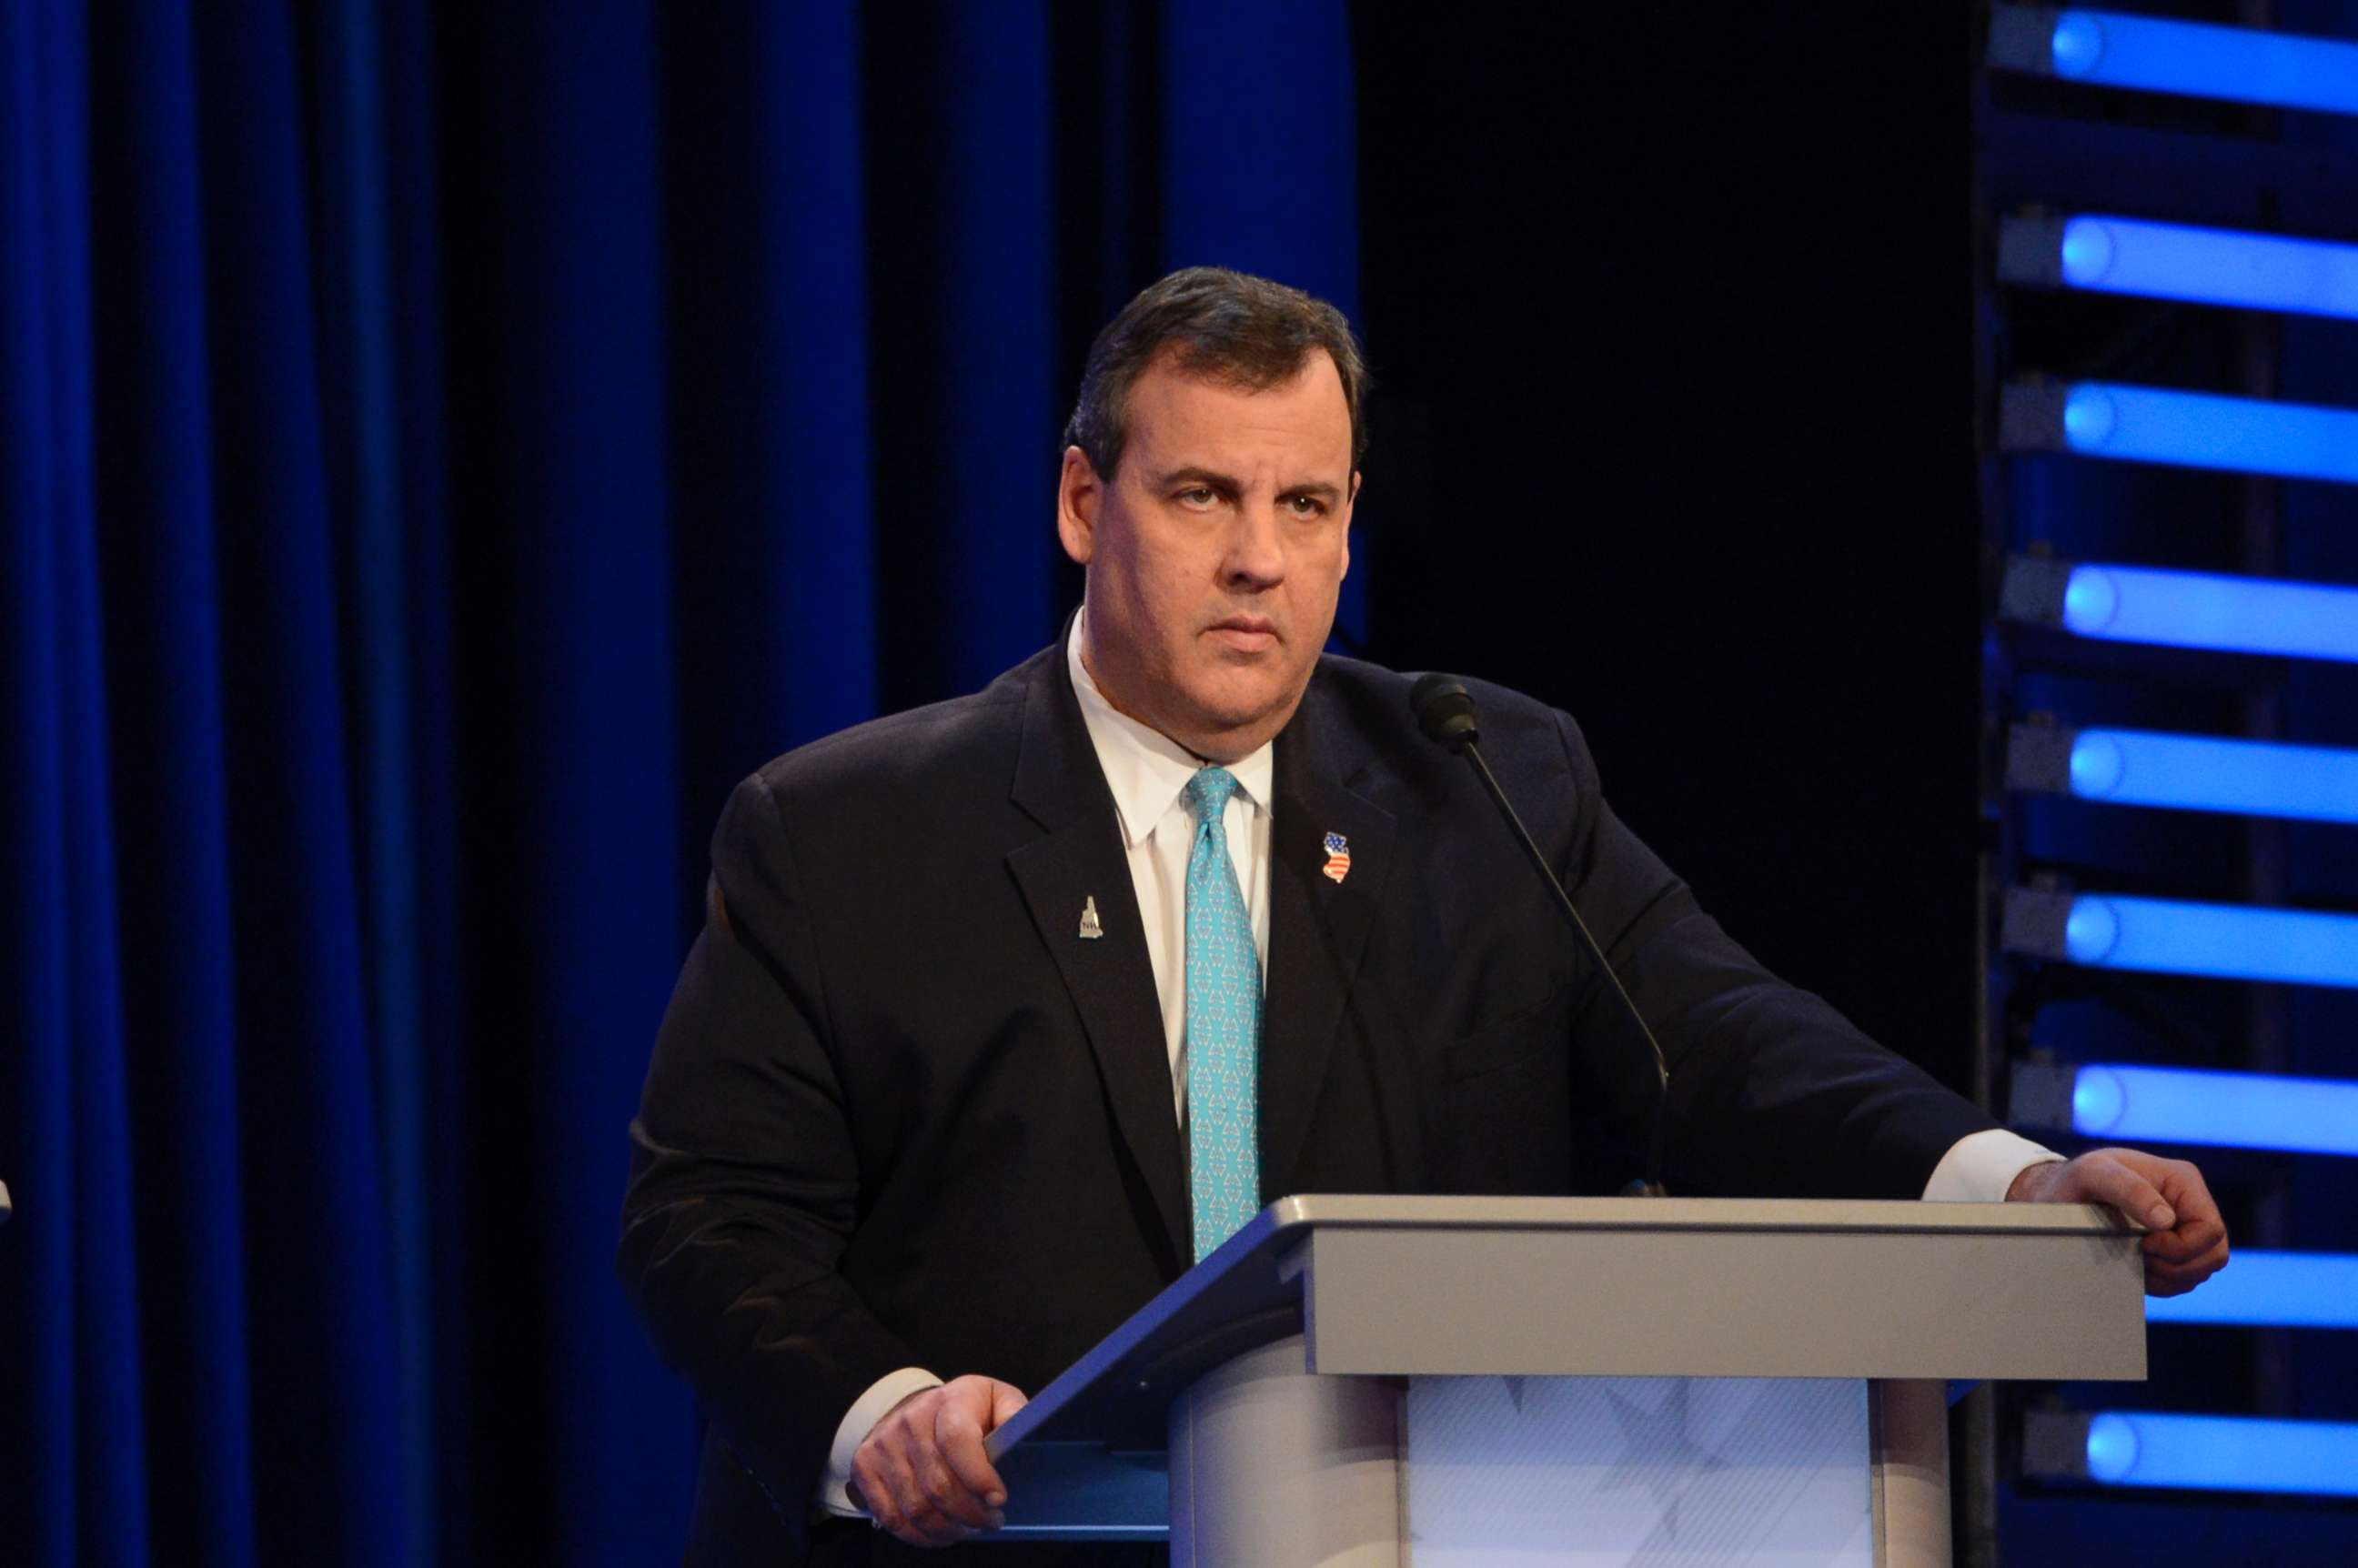 PHOTO: New Jersey Gov. Chris Christie at the Republican Debate at St. Anselm College in Manchester, N.H., Feb. 6, 2016.